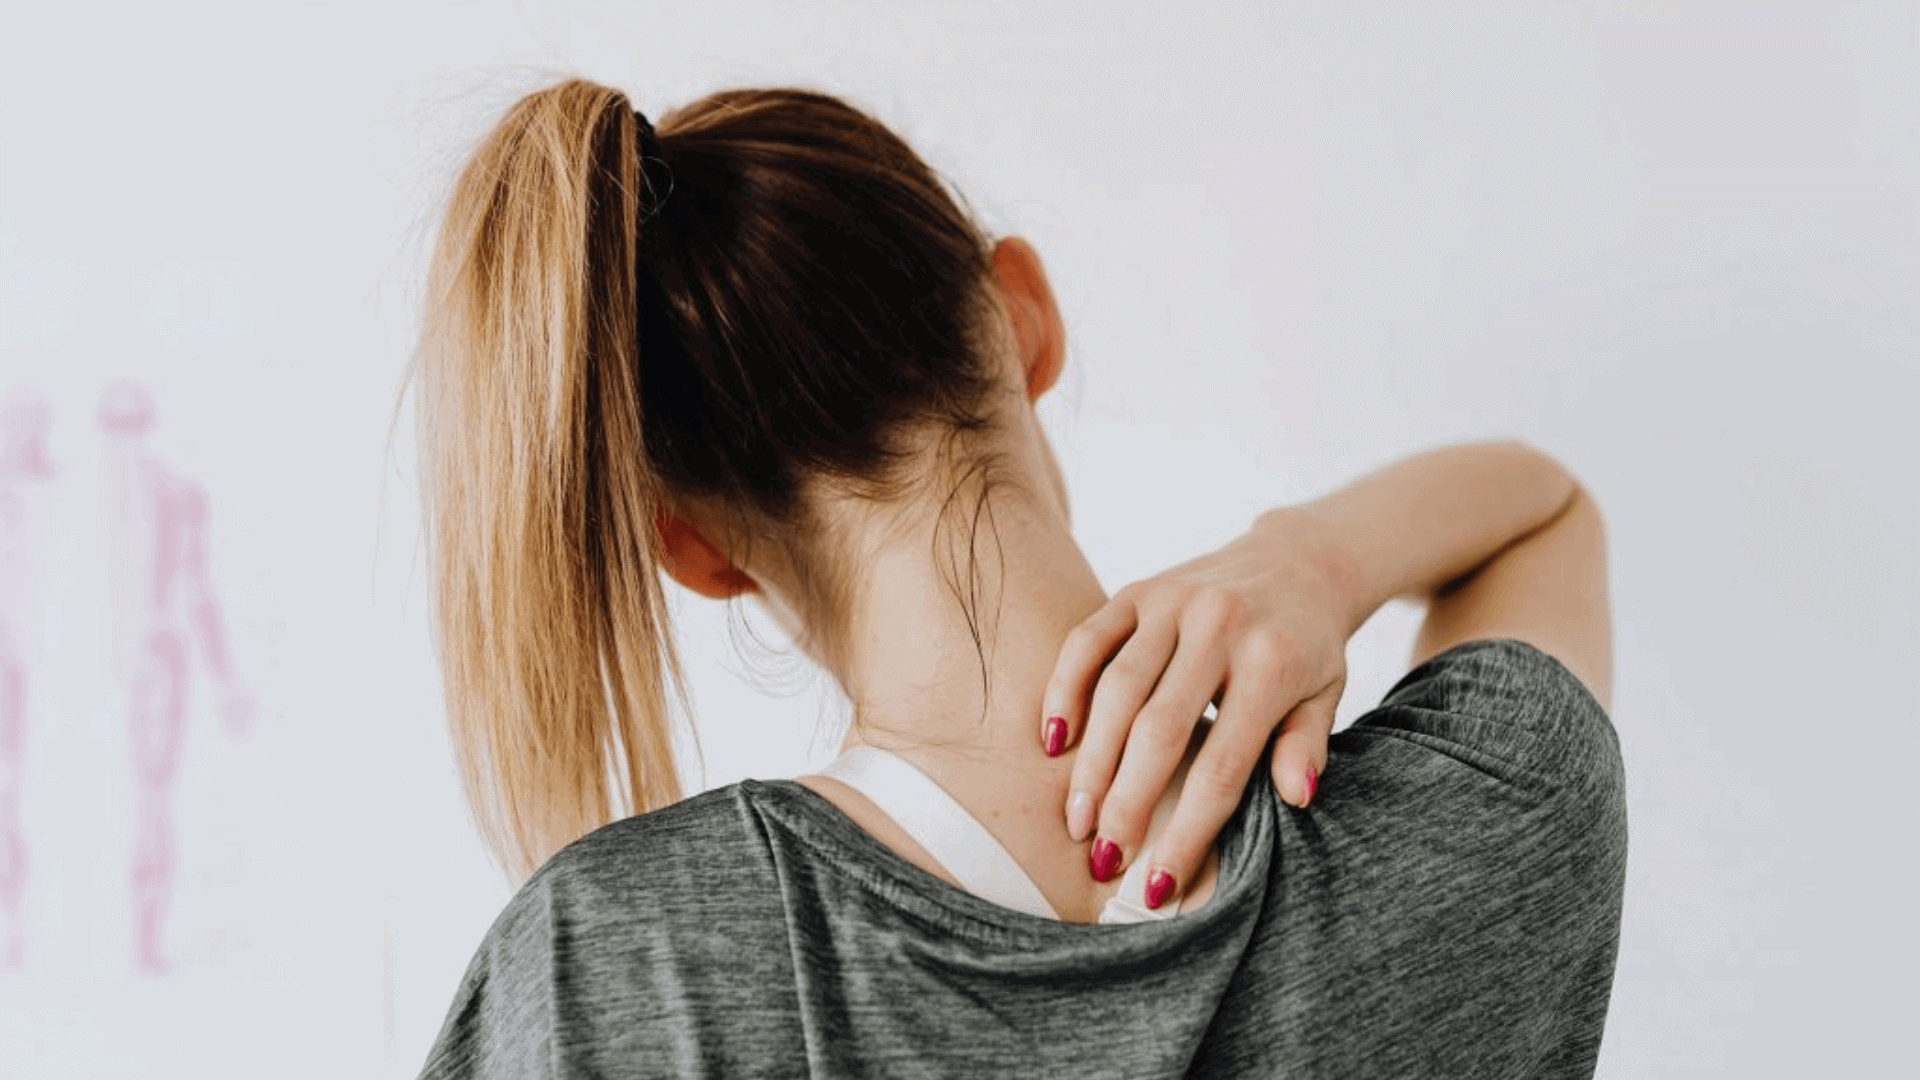 5 Ways CBD Oil May Help You Manage Pain & Anxiety